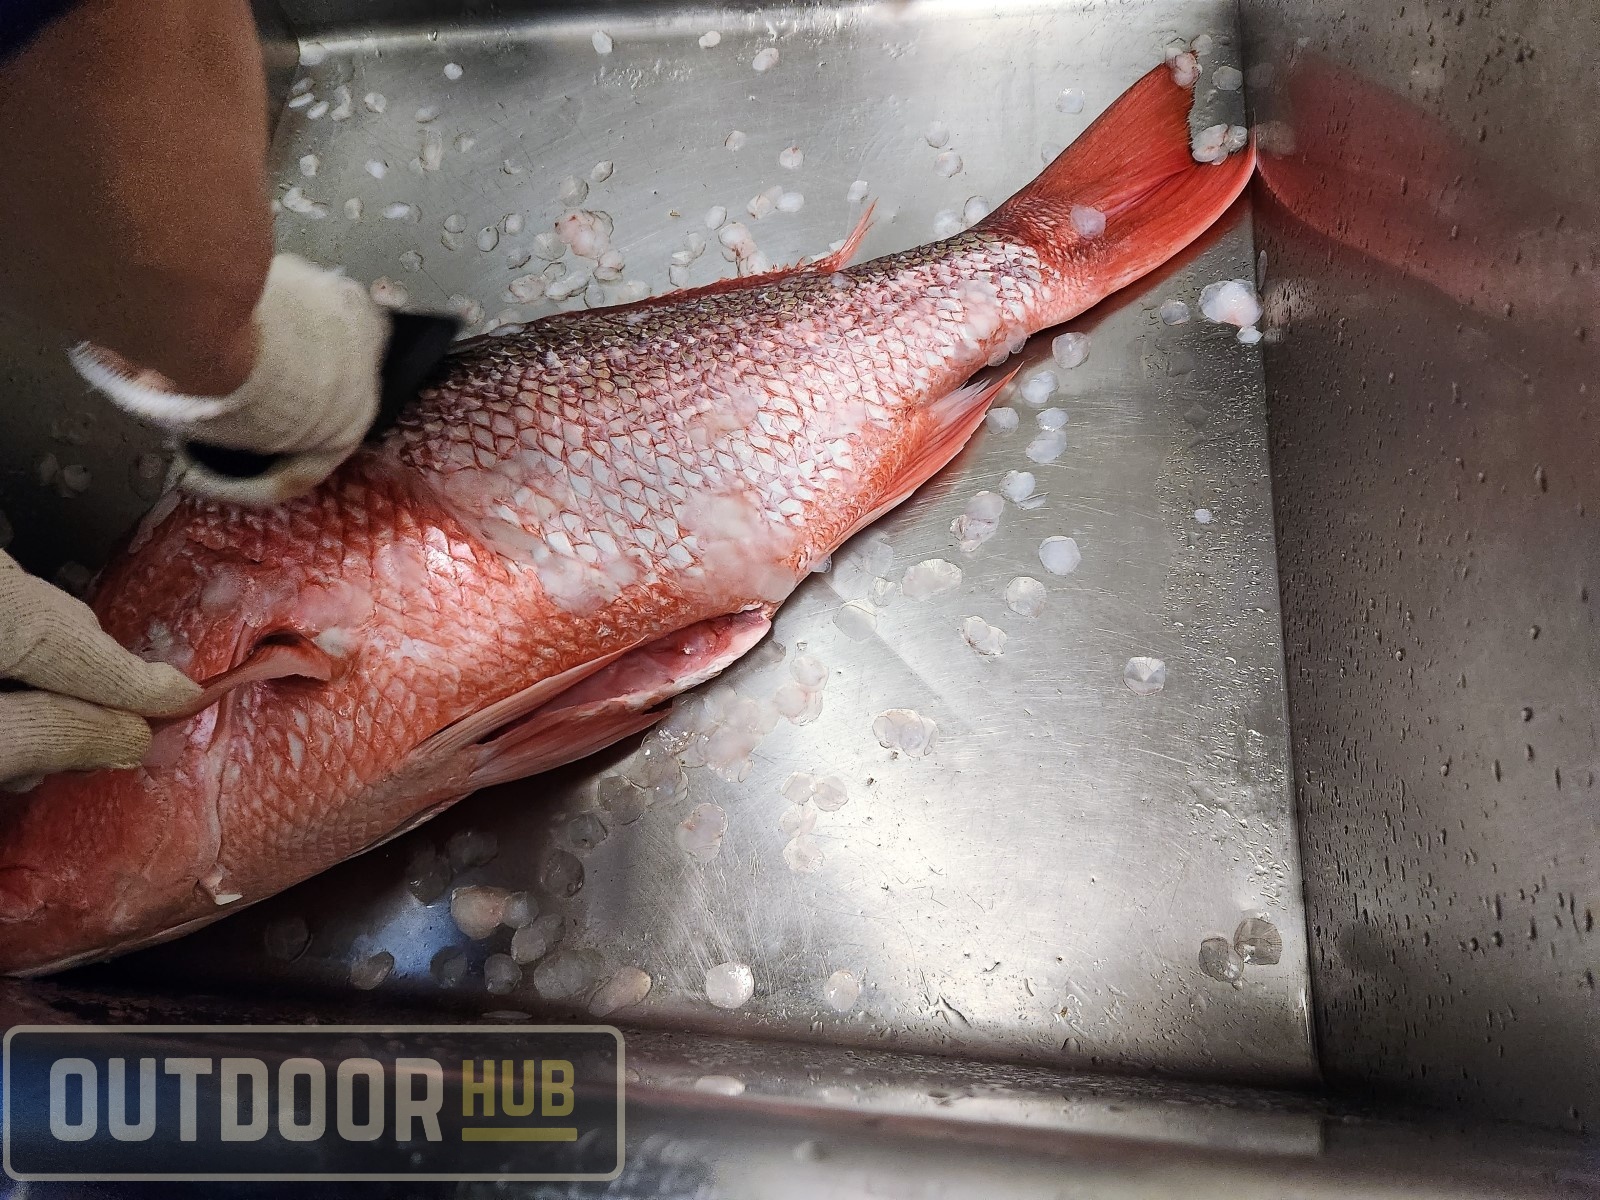 How to Clean, Scale, and Fillet a Fish